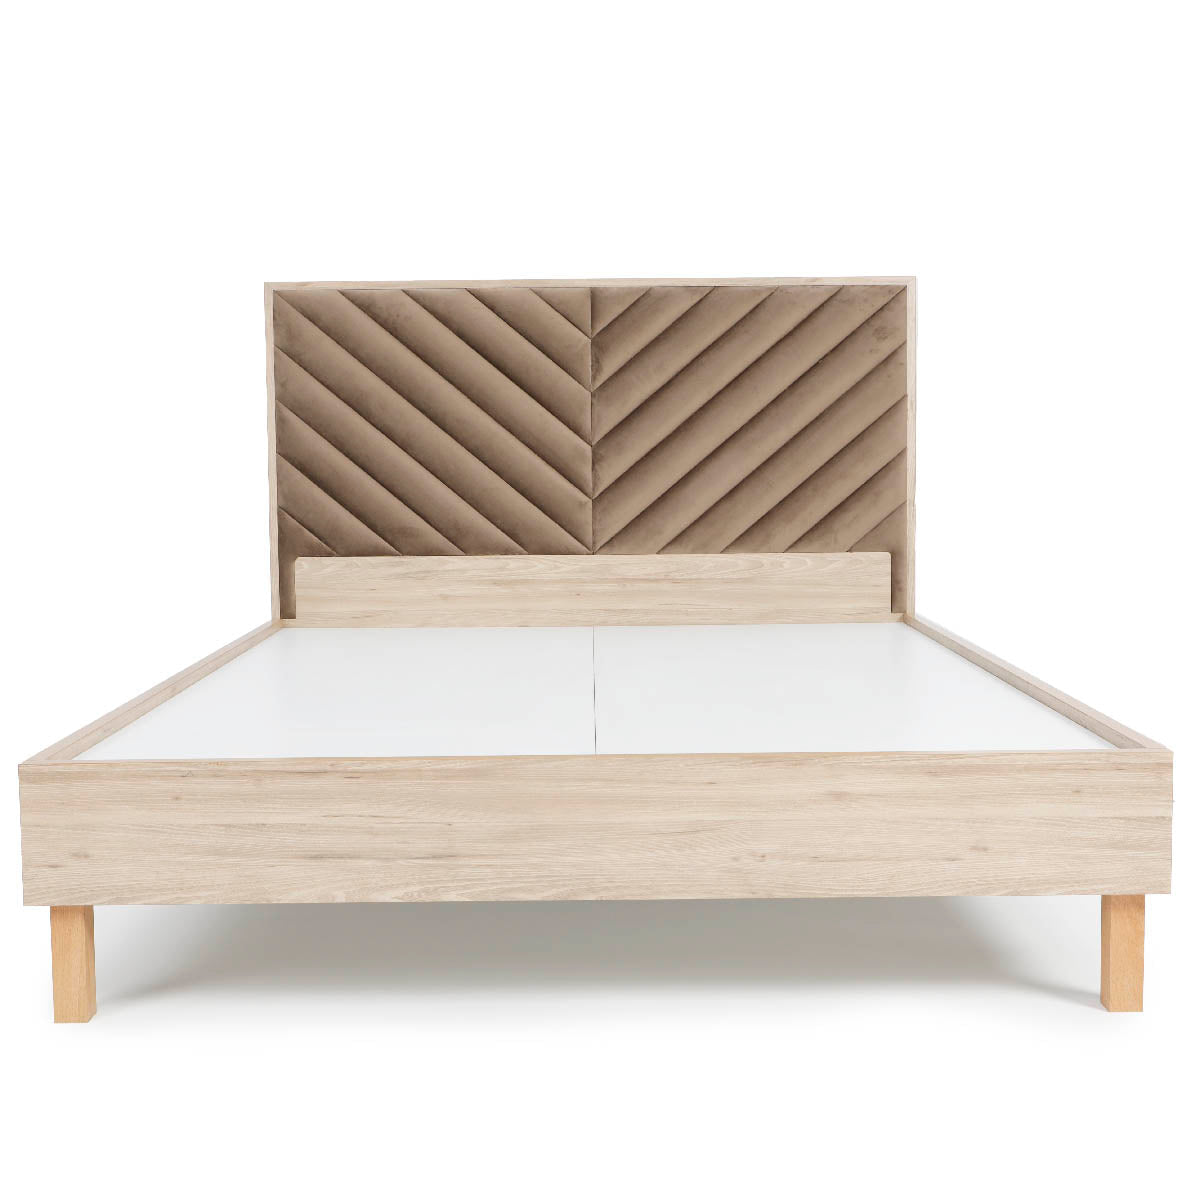 Rostabella Queen Size Bed